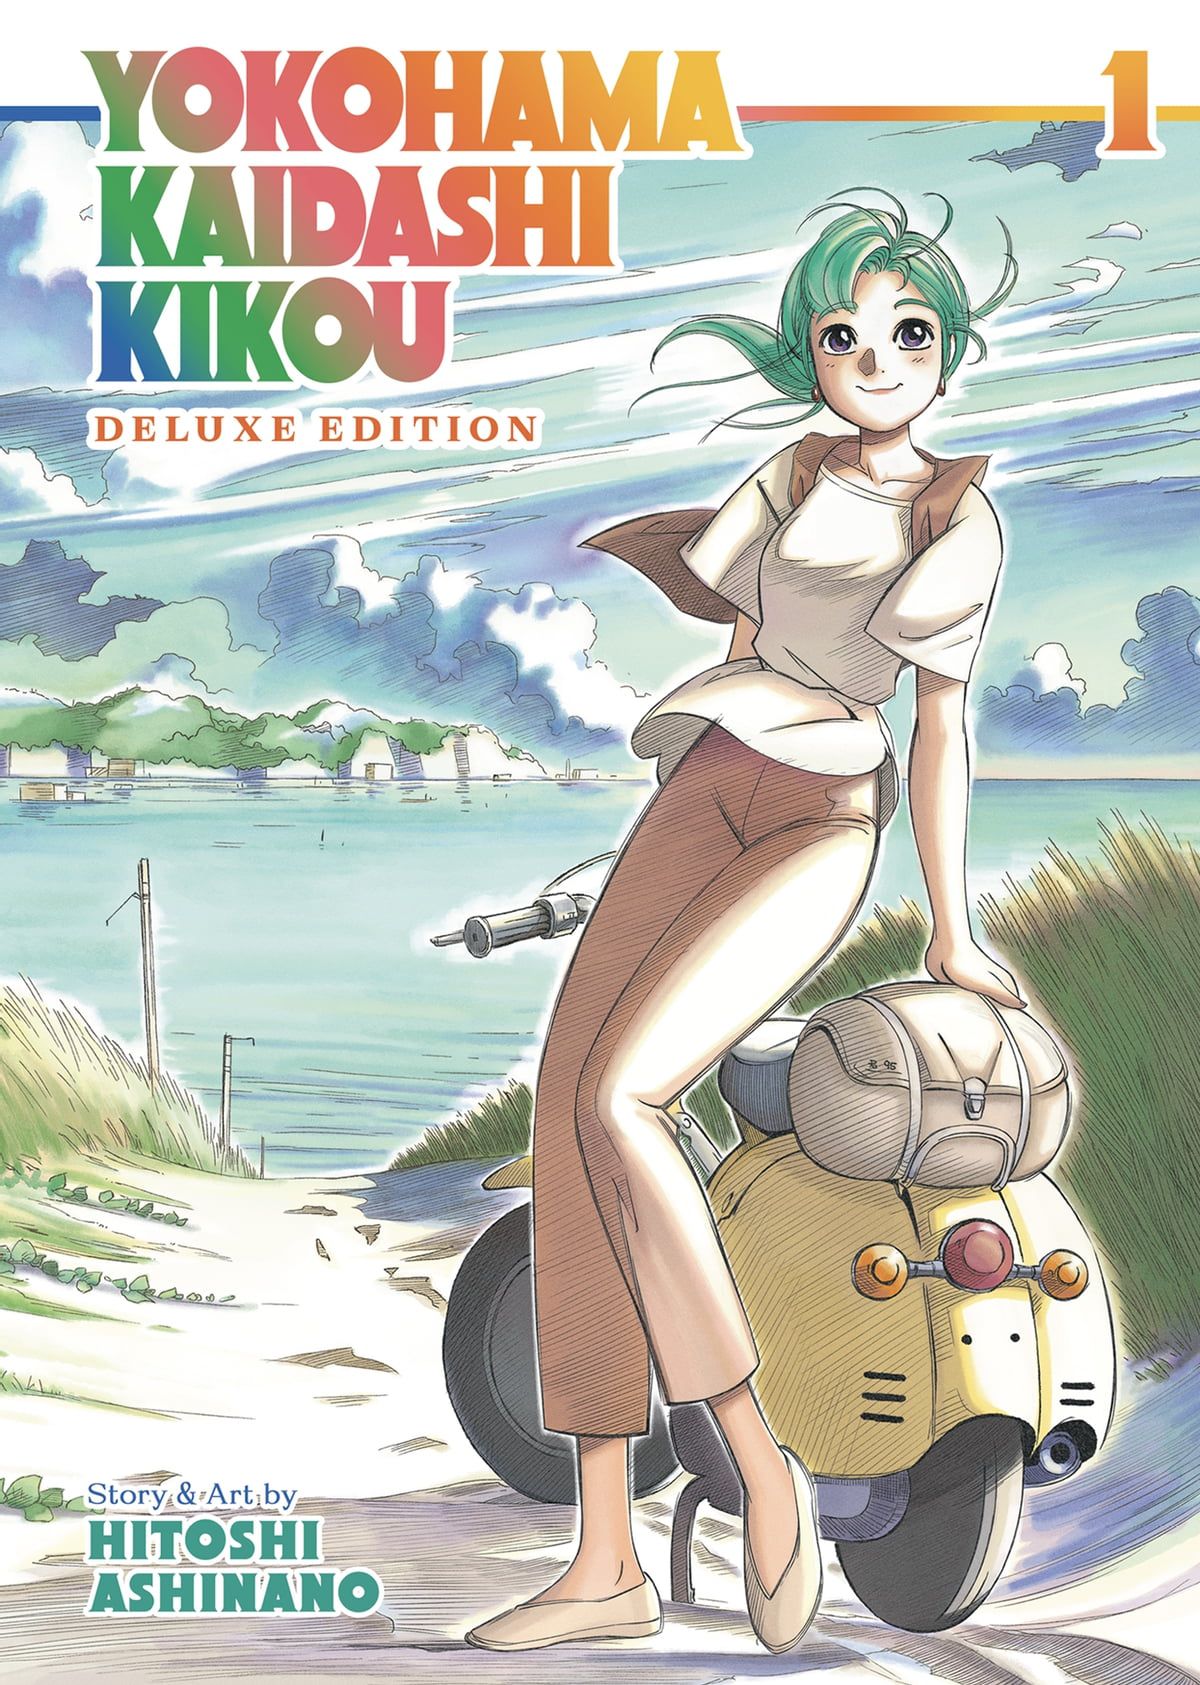 A young woman with sea green hair illustrated in manga style leans on a yellow vespa parked on a dirt road on the way to the beach in the cover for Yokohama Kaidashi Kikou: Deluxe Edition One